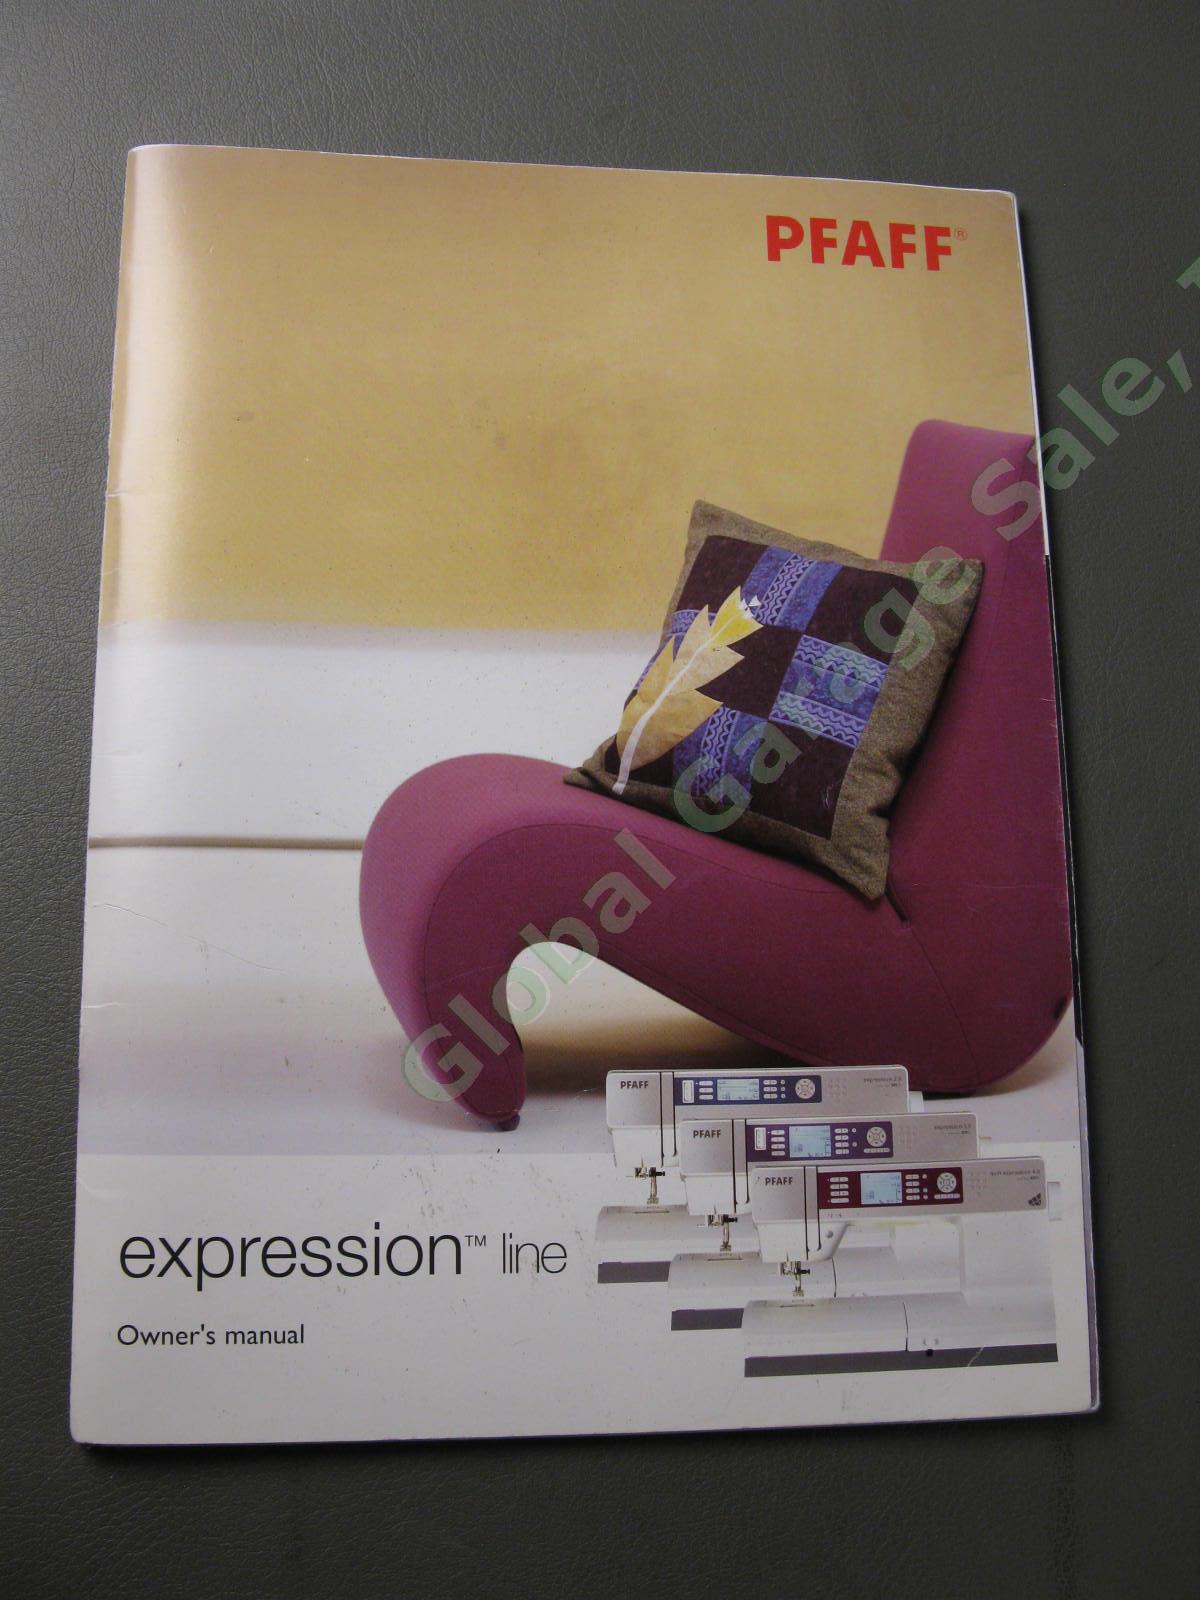 Pfaff Quilt Expression 4.0 Sewing Machine One Owner Just Dealer Serviced Cleaned 3